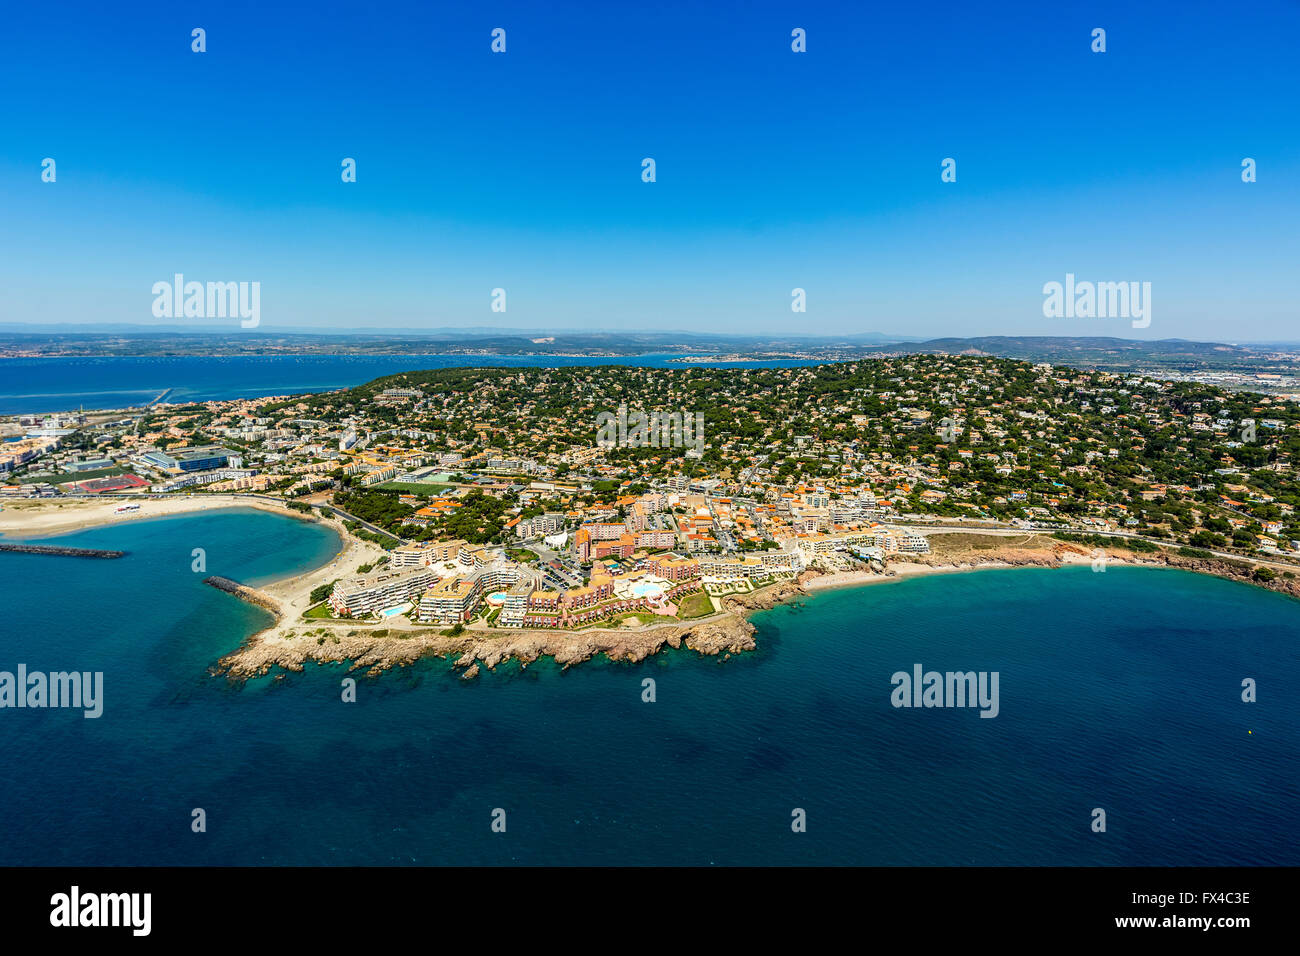 Aerial view, overlooking the old town of Sete, Sète, France, Languedoc-Roussillon, France, Europe, the Mediterranean Sea, aerial Stock Photo